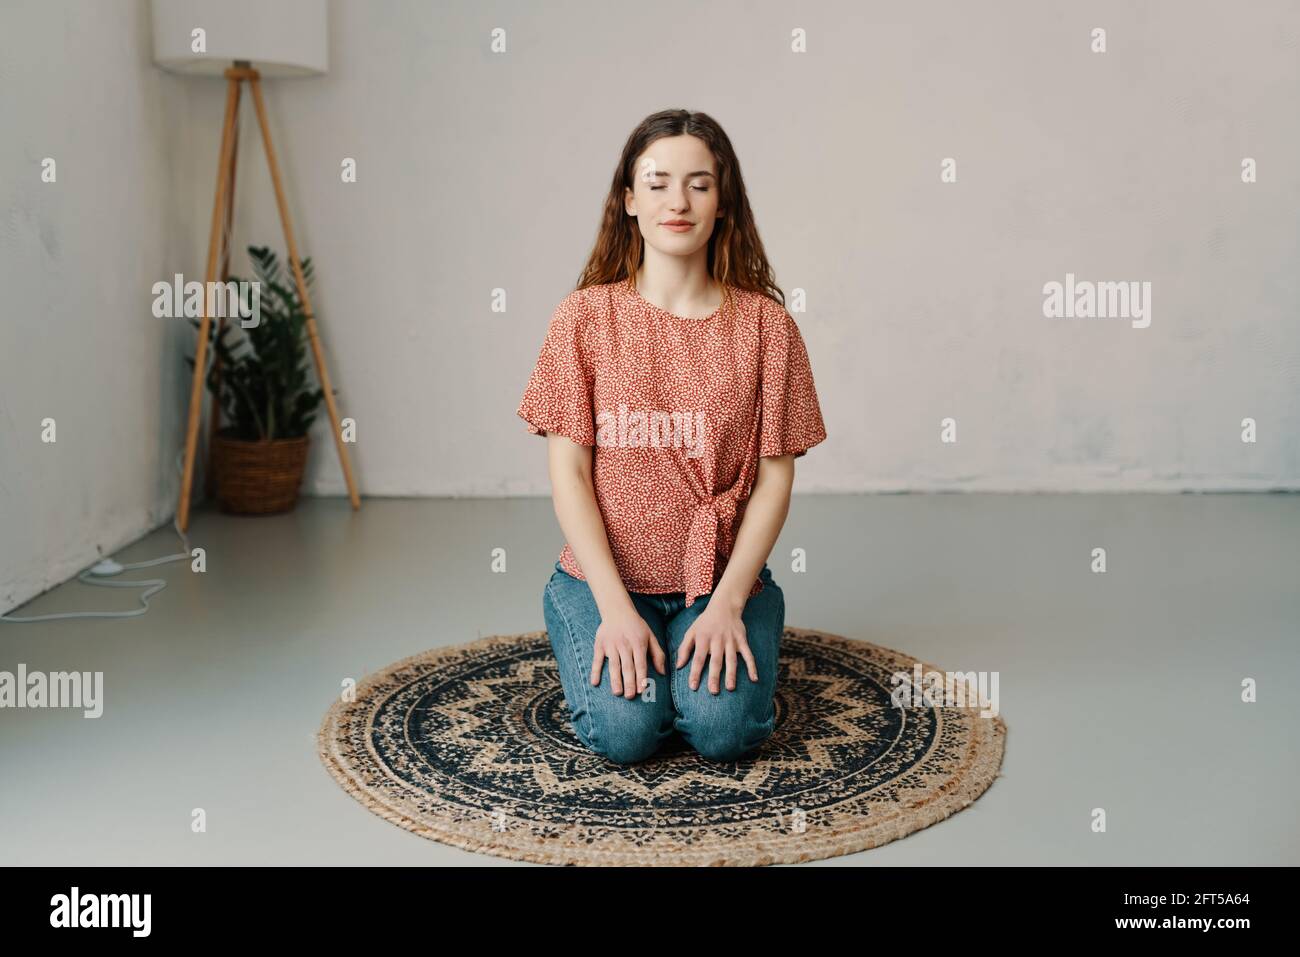 Young woman kneeling on a round mat at home meditating with a serene expression and closed eyes in a health and wellbeing concept with copyspace Stock Photo